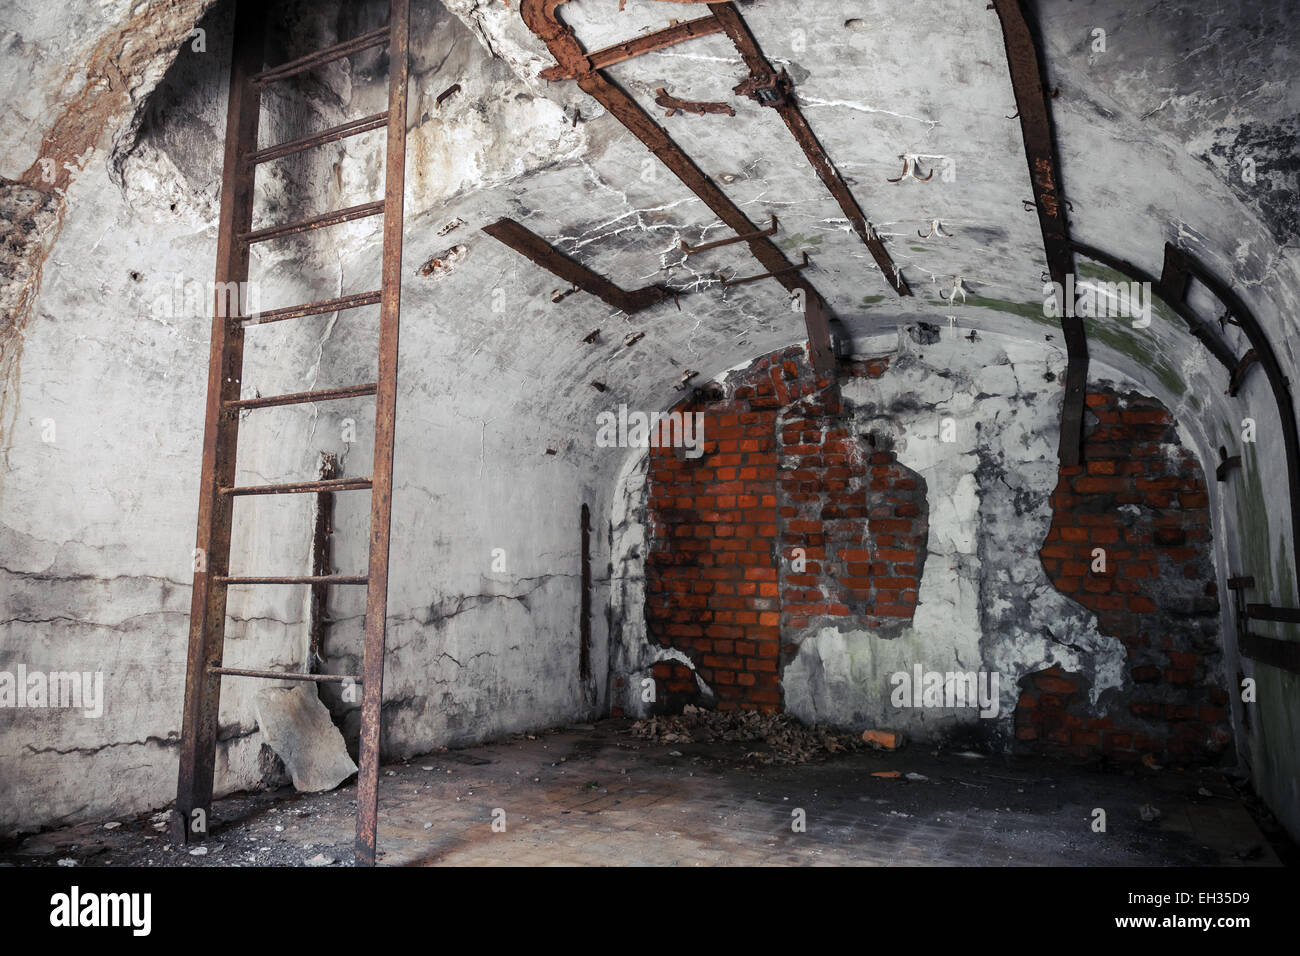 Old empty abandoned bunker interior with white walls and rusted constructions Stock Photo